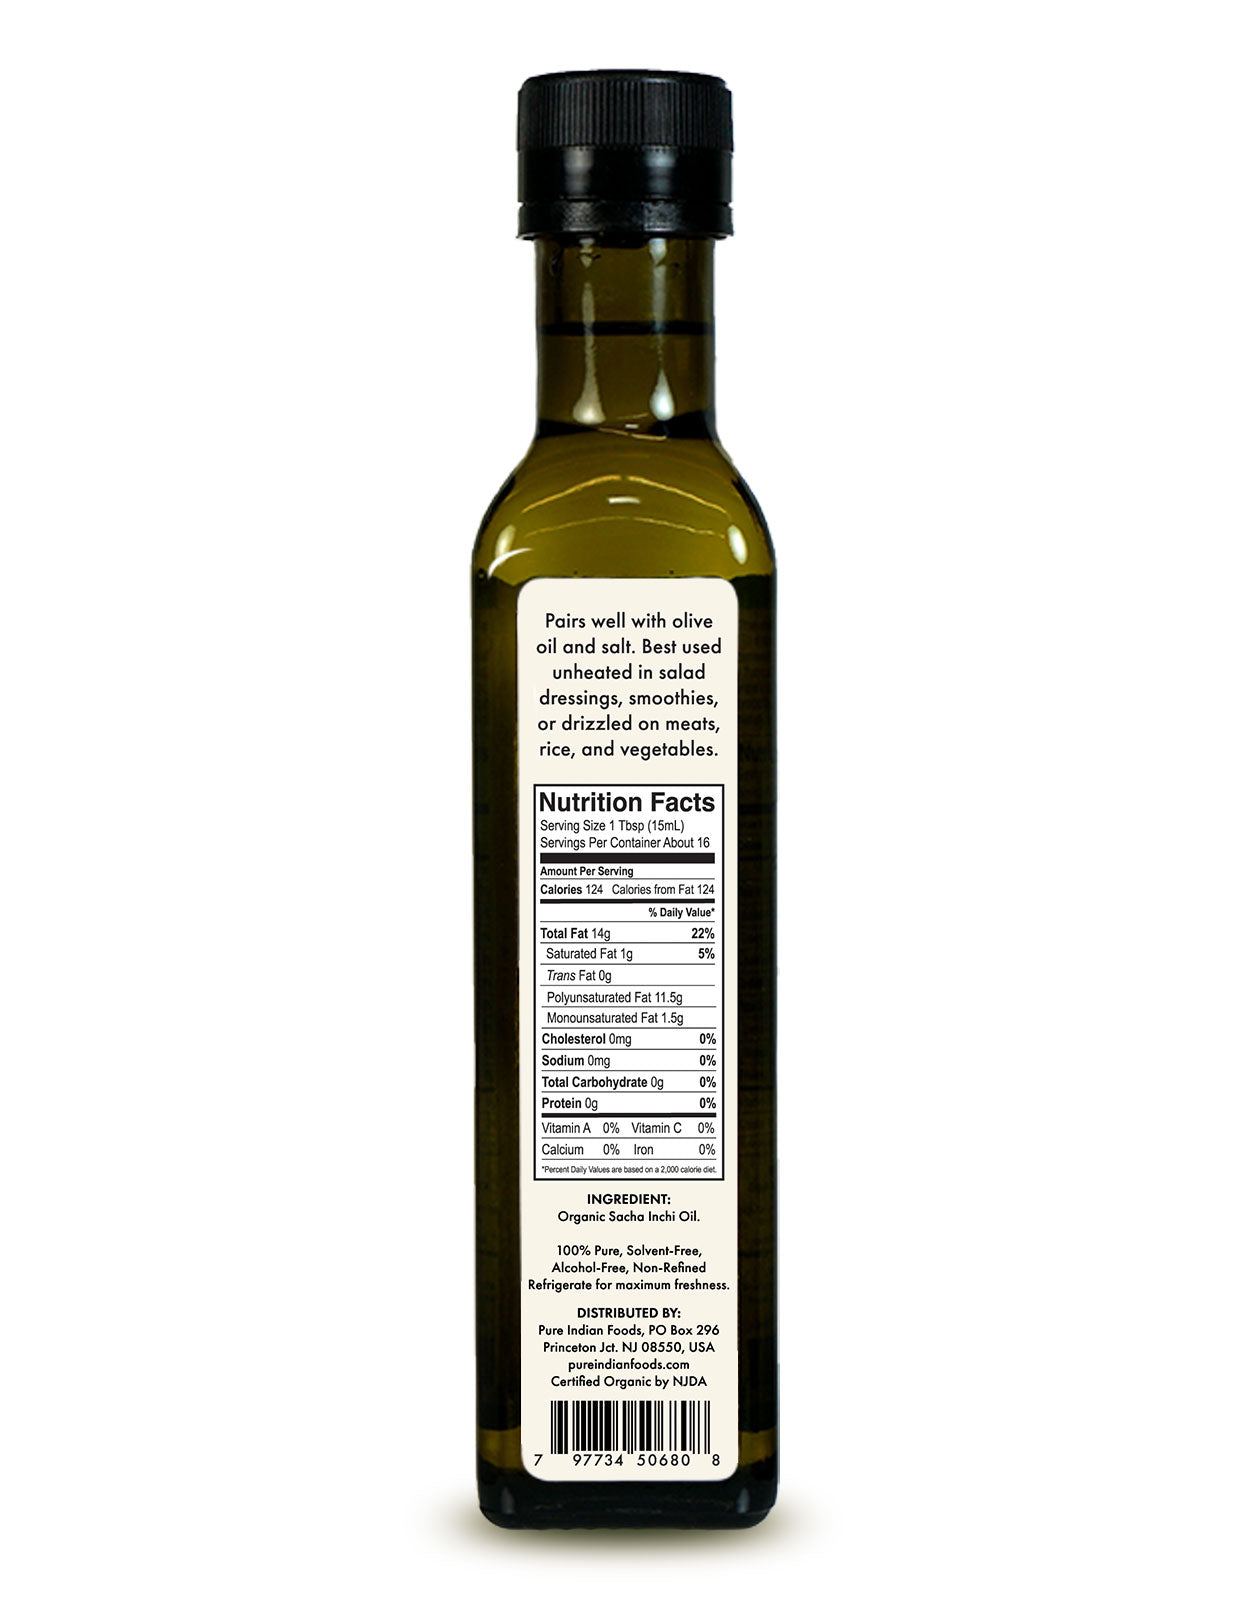 Nutrition facts label on a bottle of Pure Indian Foods organic sacha inchi oil.